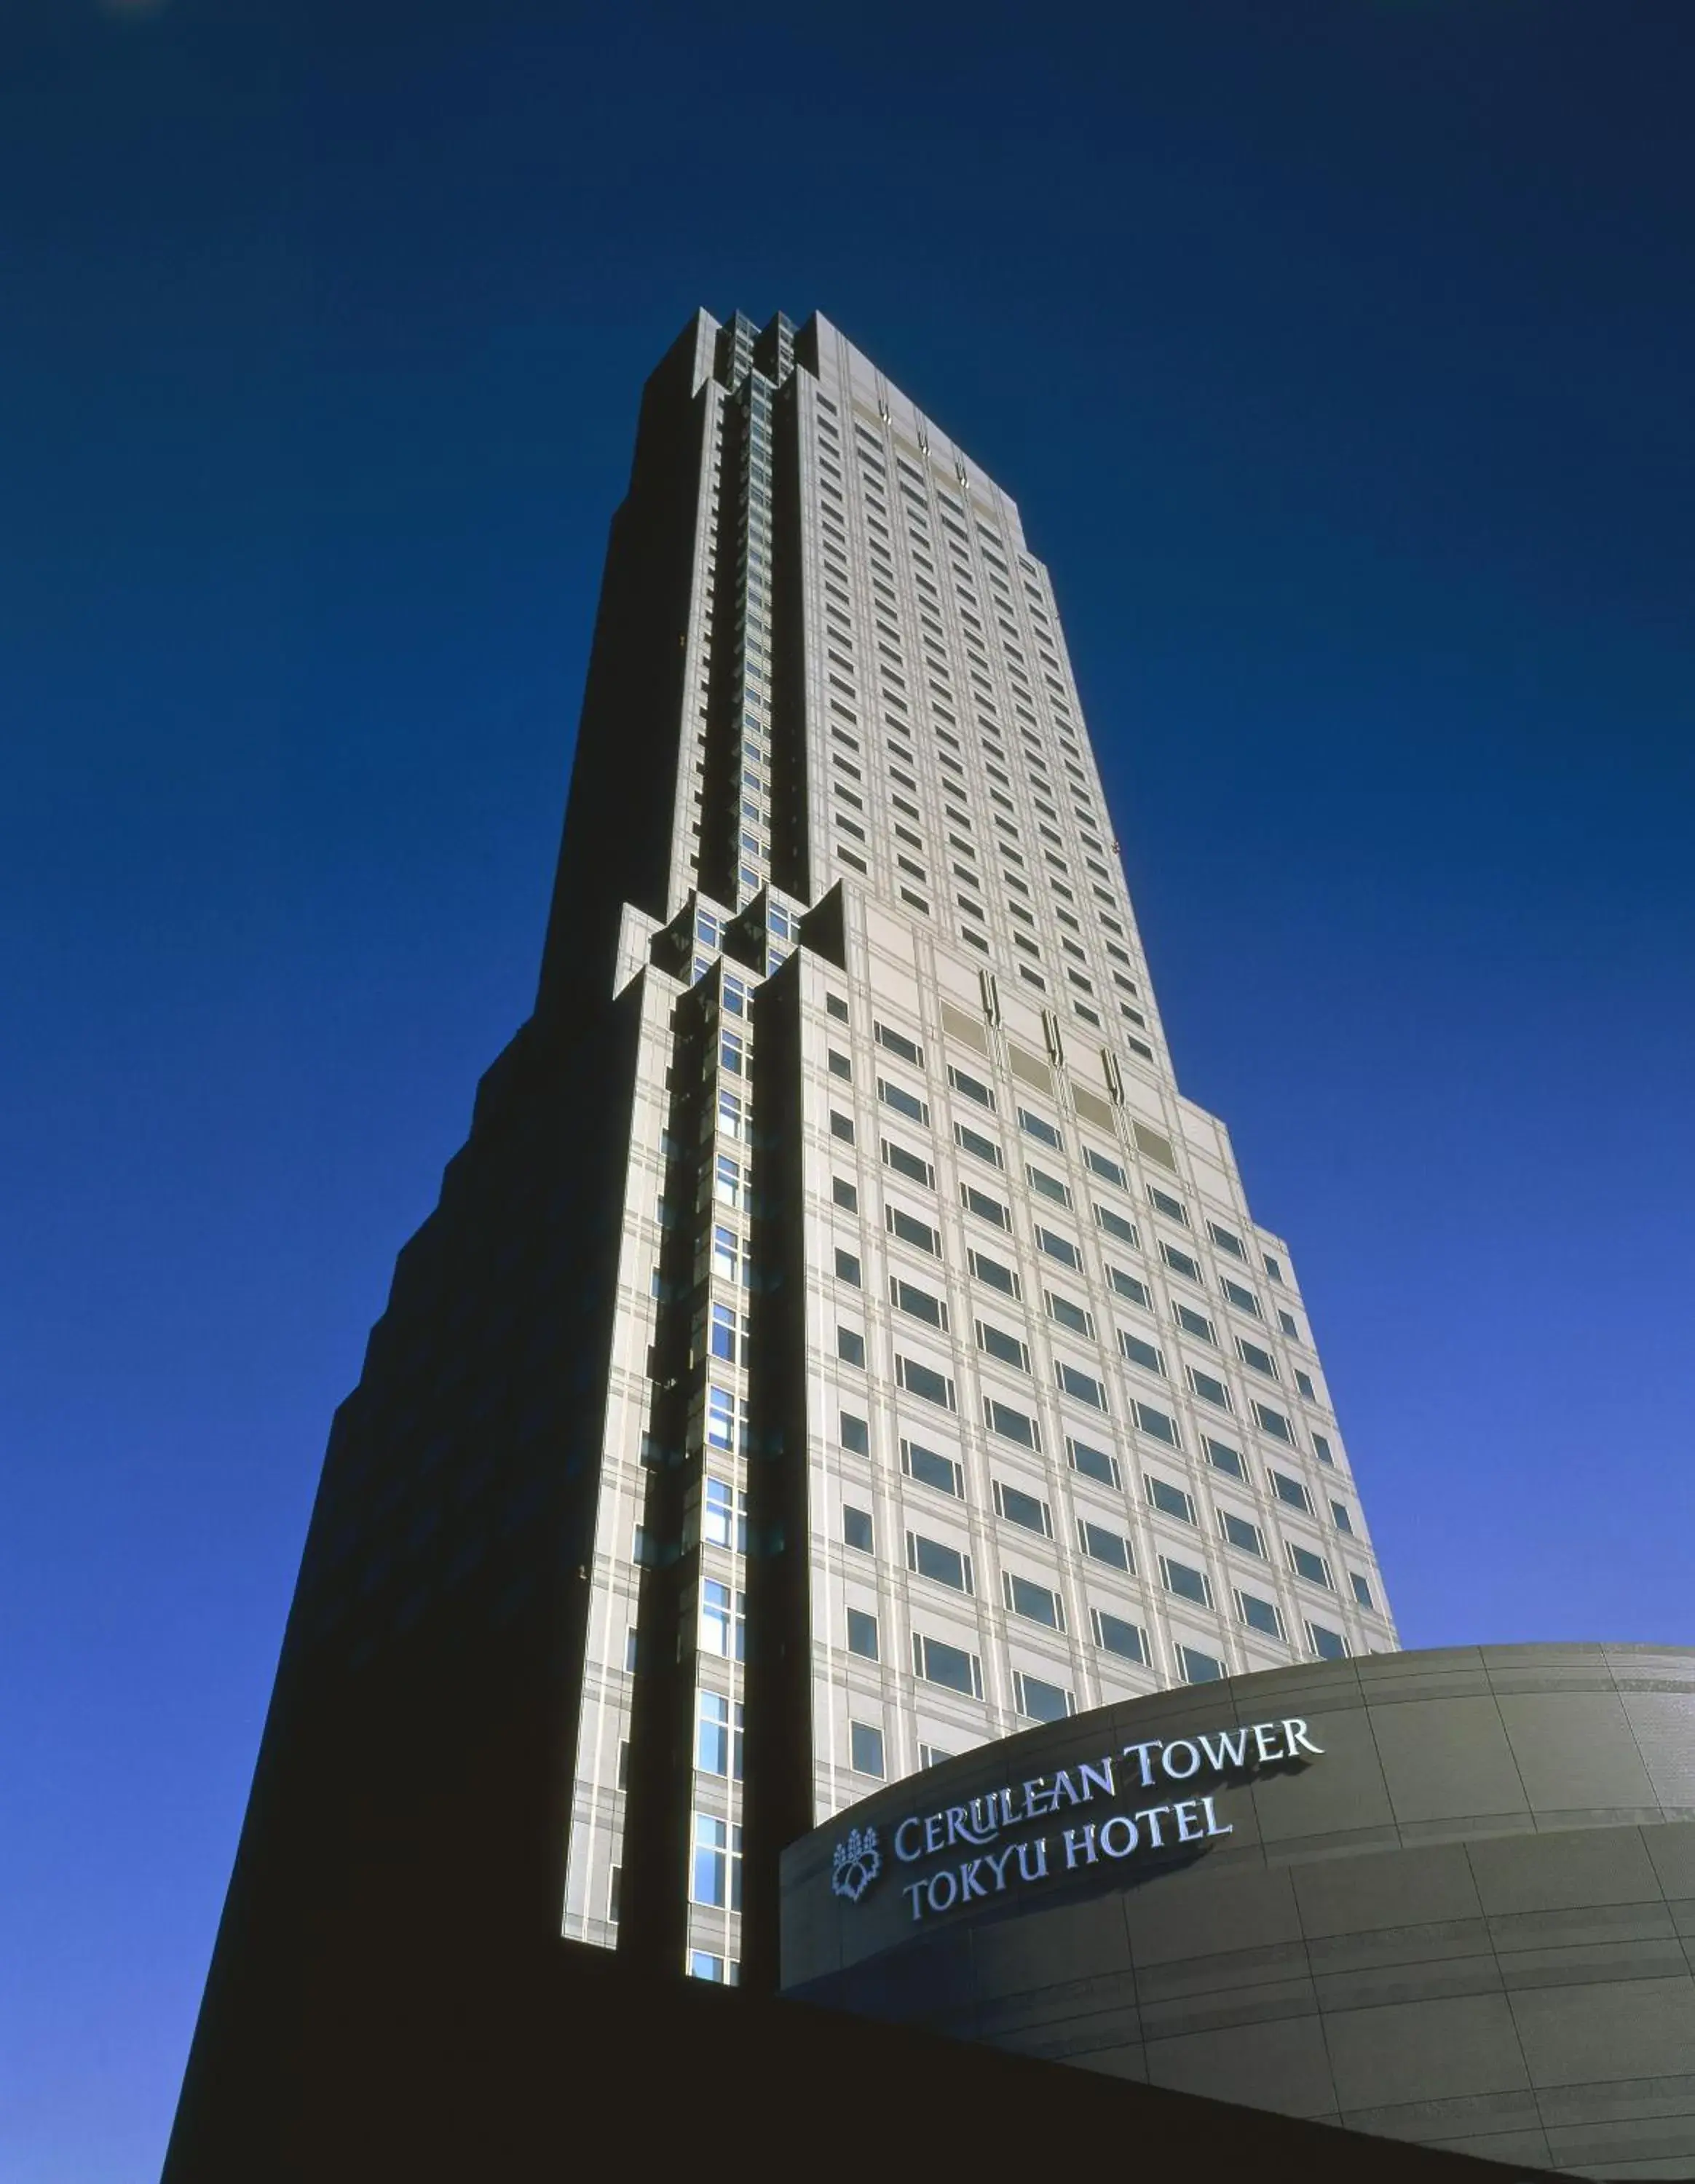 Property Building in Cerulean Tower Tokyu Hotel, A Pan Pacific Partner Hotel